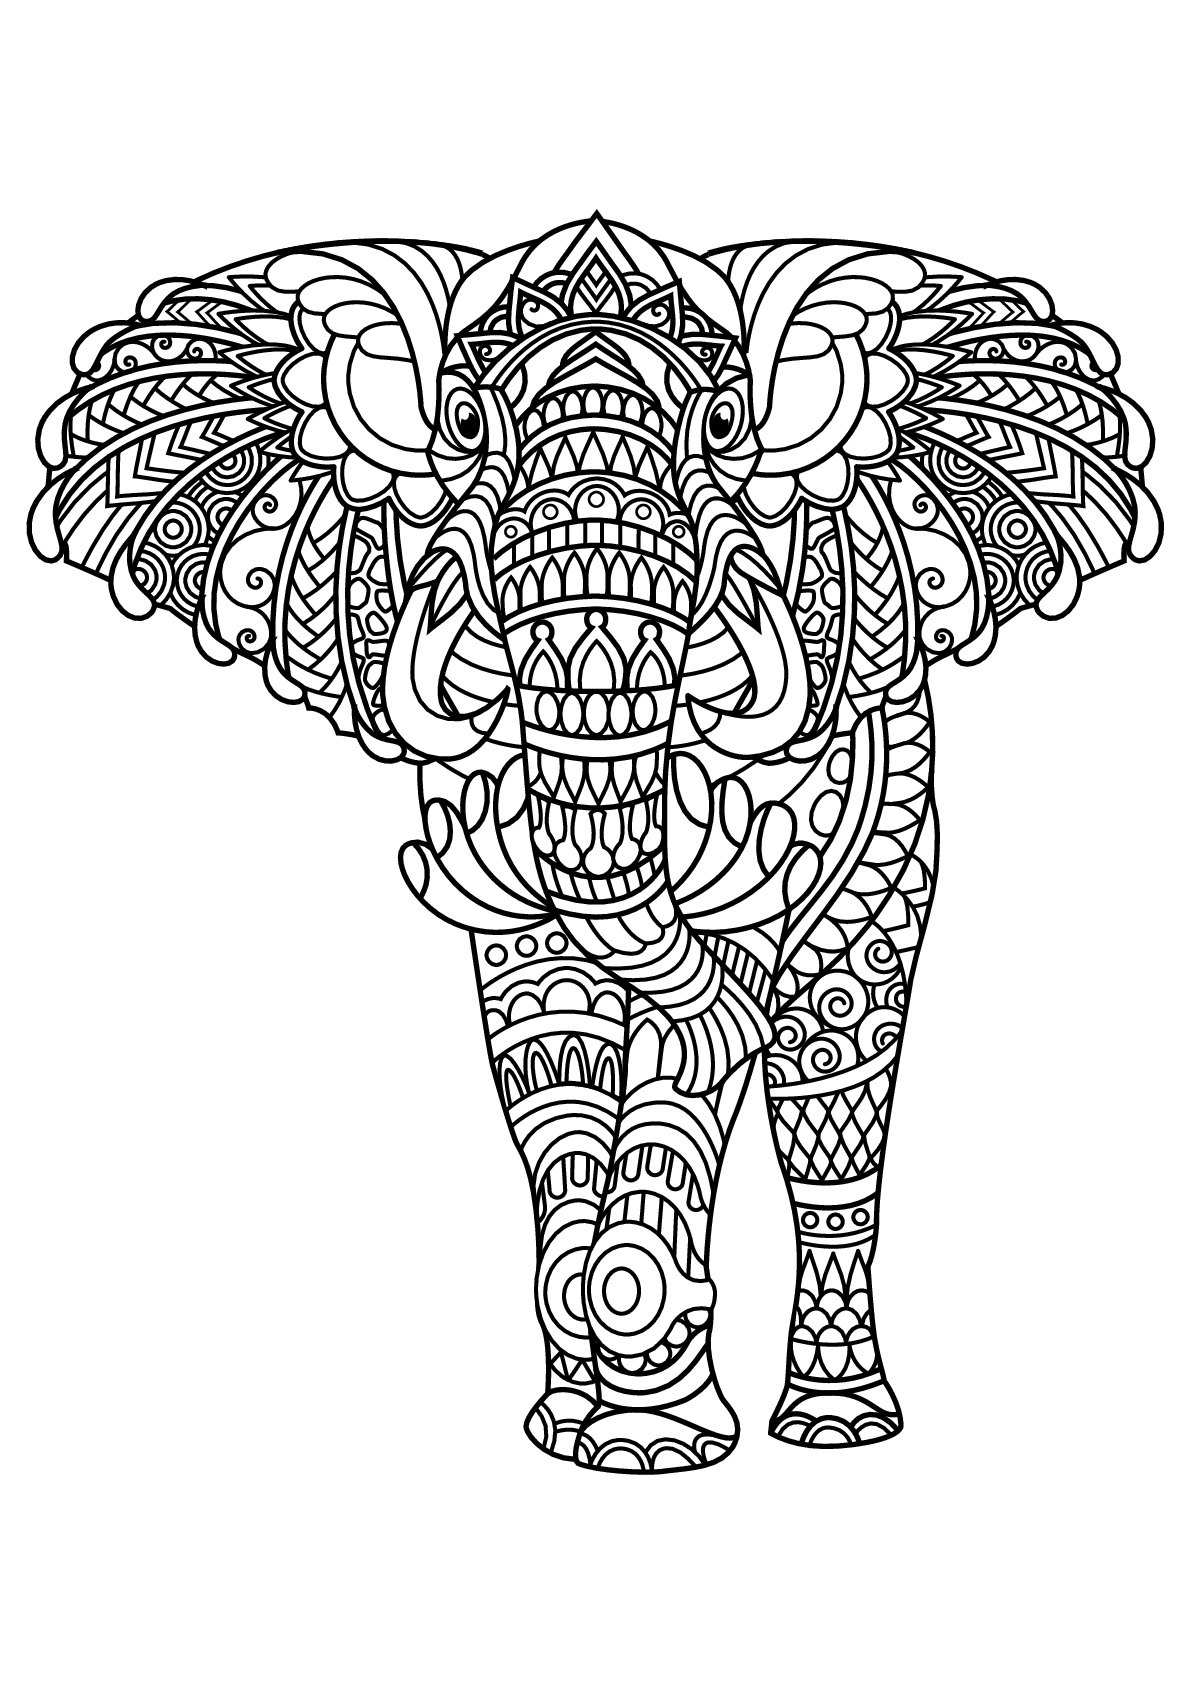 free-book-elephant-elephants-adult-coloring-pages